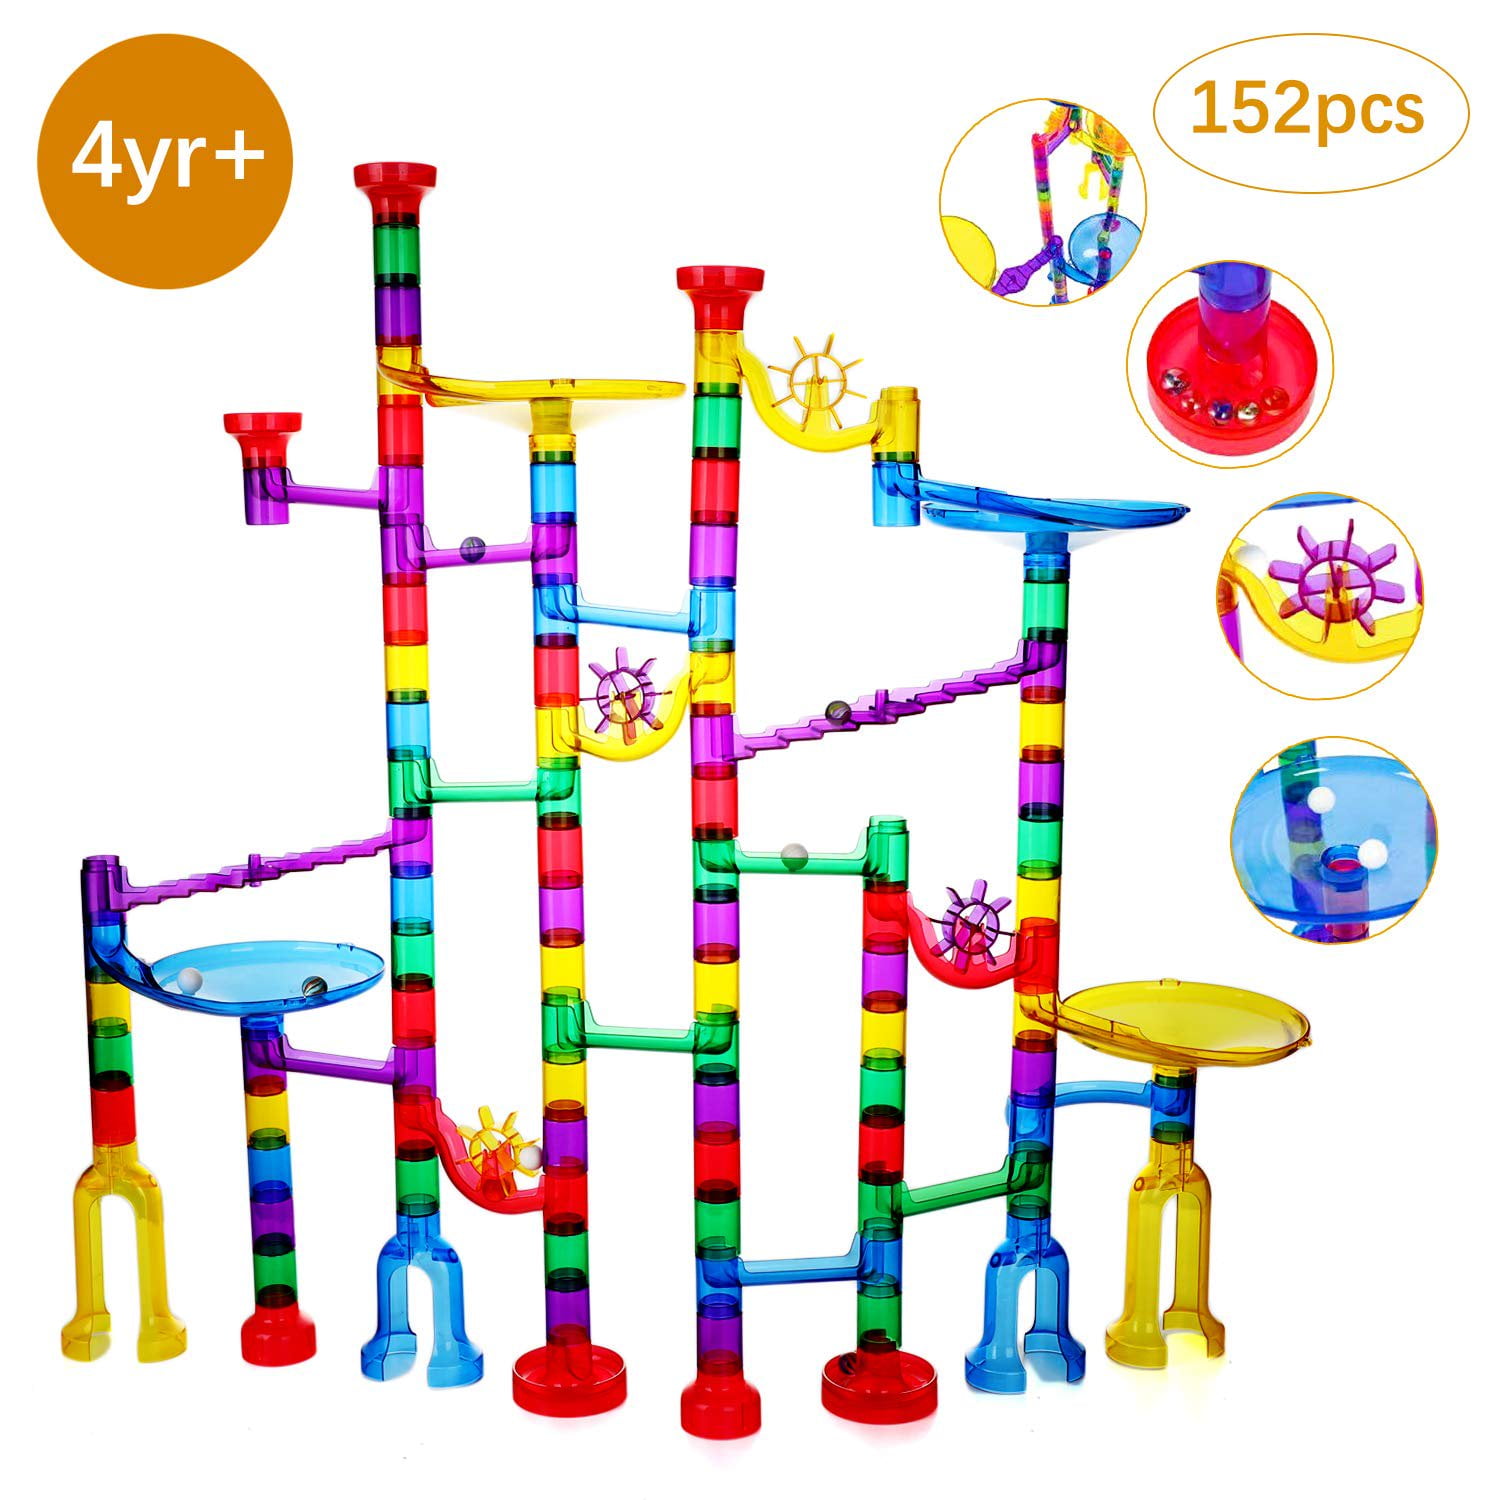 Marble Run Race Set Track Toy Game Construction Building Blocks Maze Kids Gift 